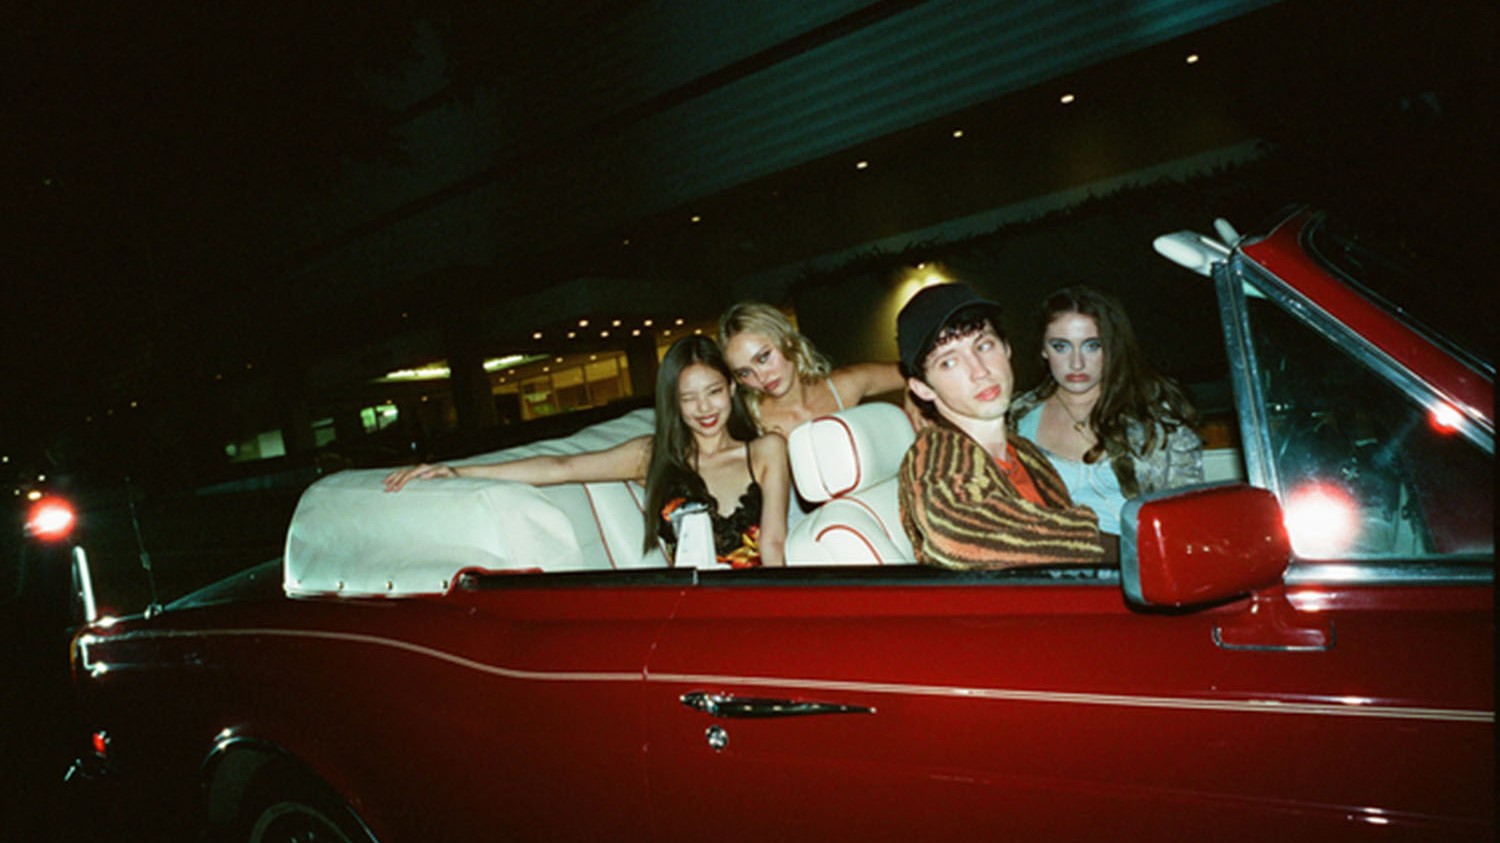 jennie kim, troye sivan, lily rose depp and rachel sennott pose in a red convertible while filming hbo's the idol